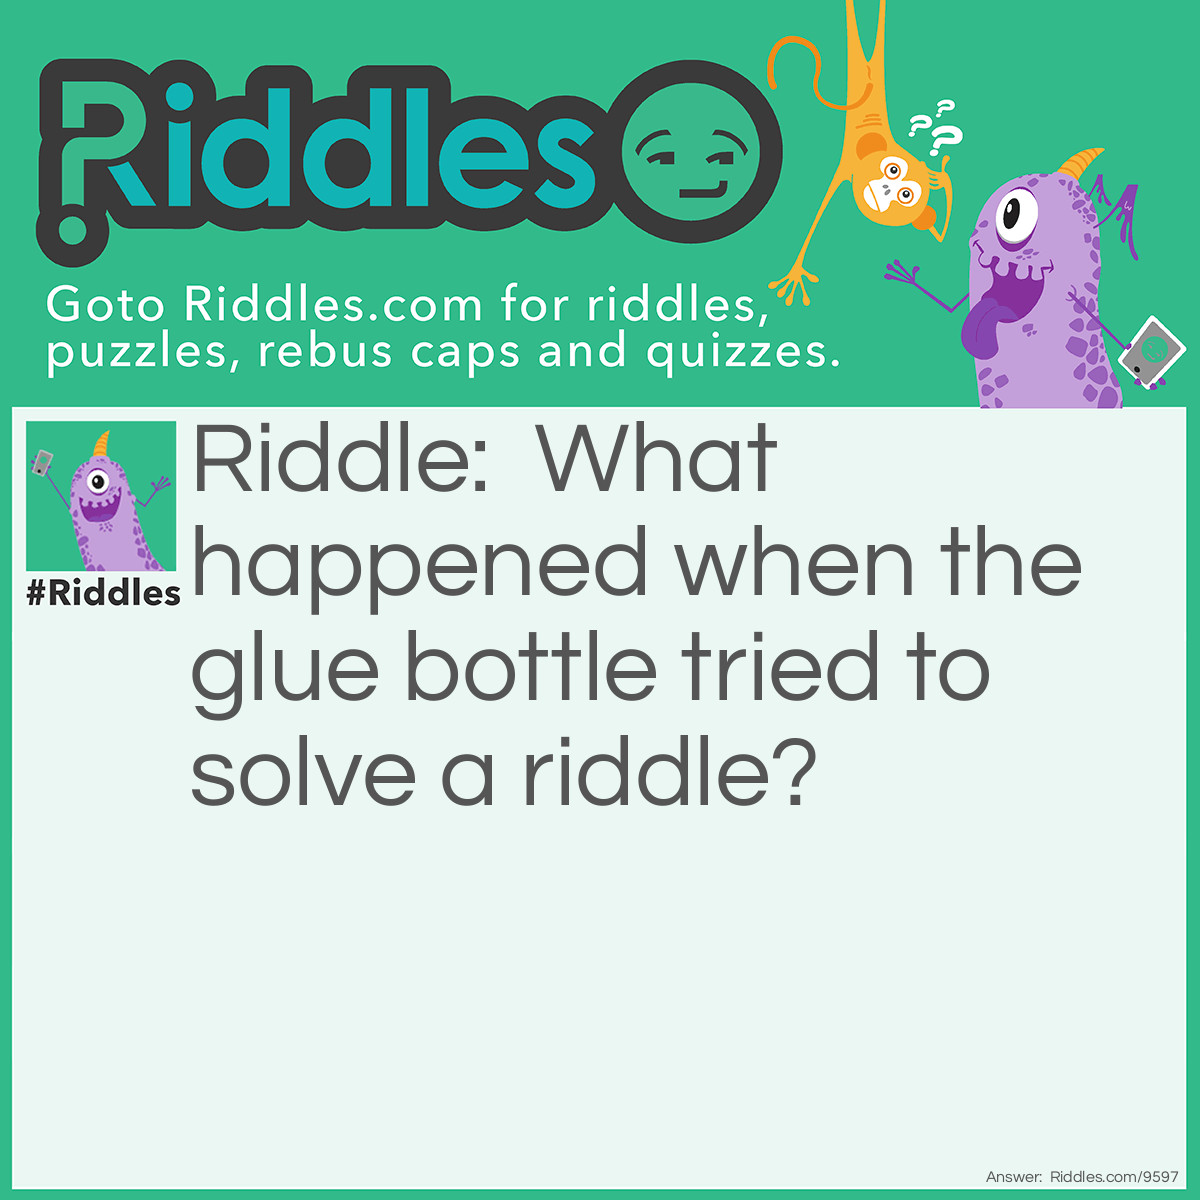 Riddle: What happened when the glue bottle tried to solve a riddle? Answer: He got stuck!